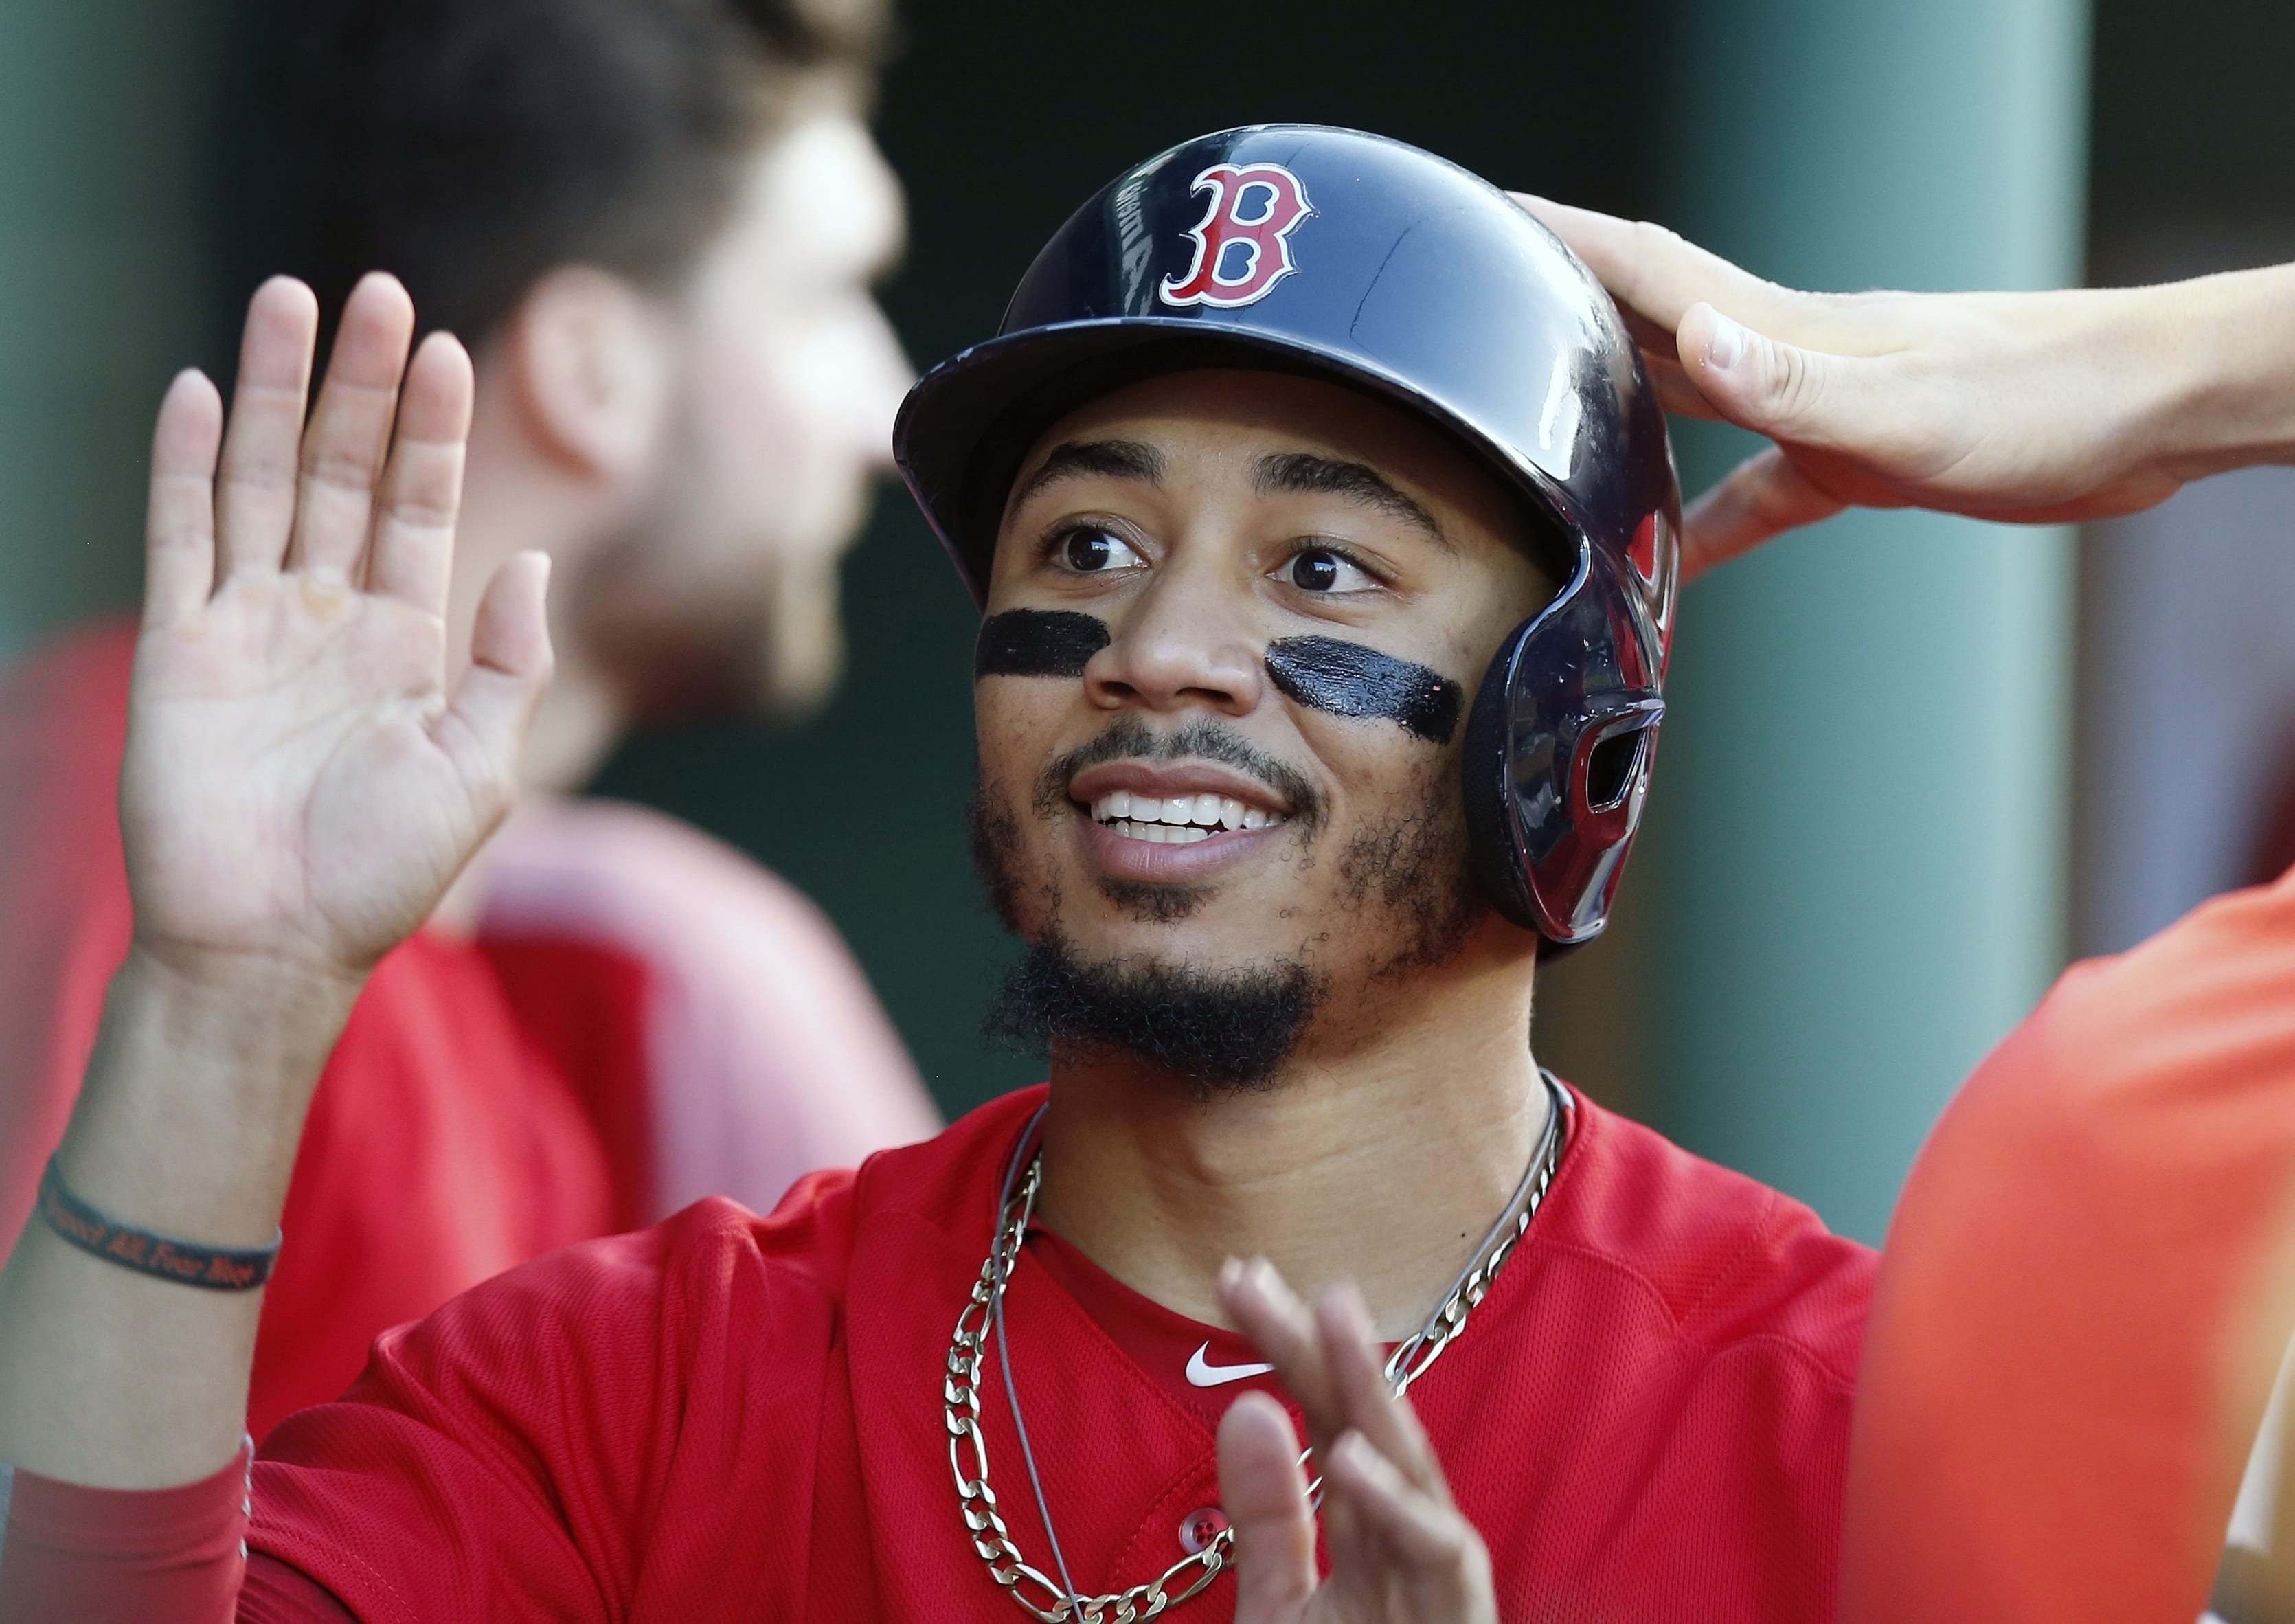 Boston Red Sox's Mookie Betts was the runaway winners of the American League Most Valuable Player awards after leading his team to a first-place finish with a dominant season that included a batting title.